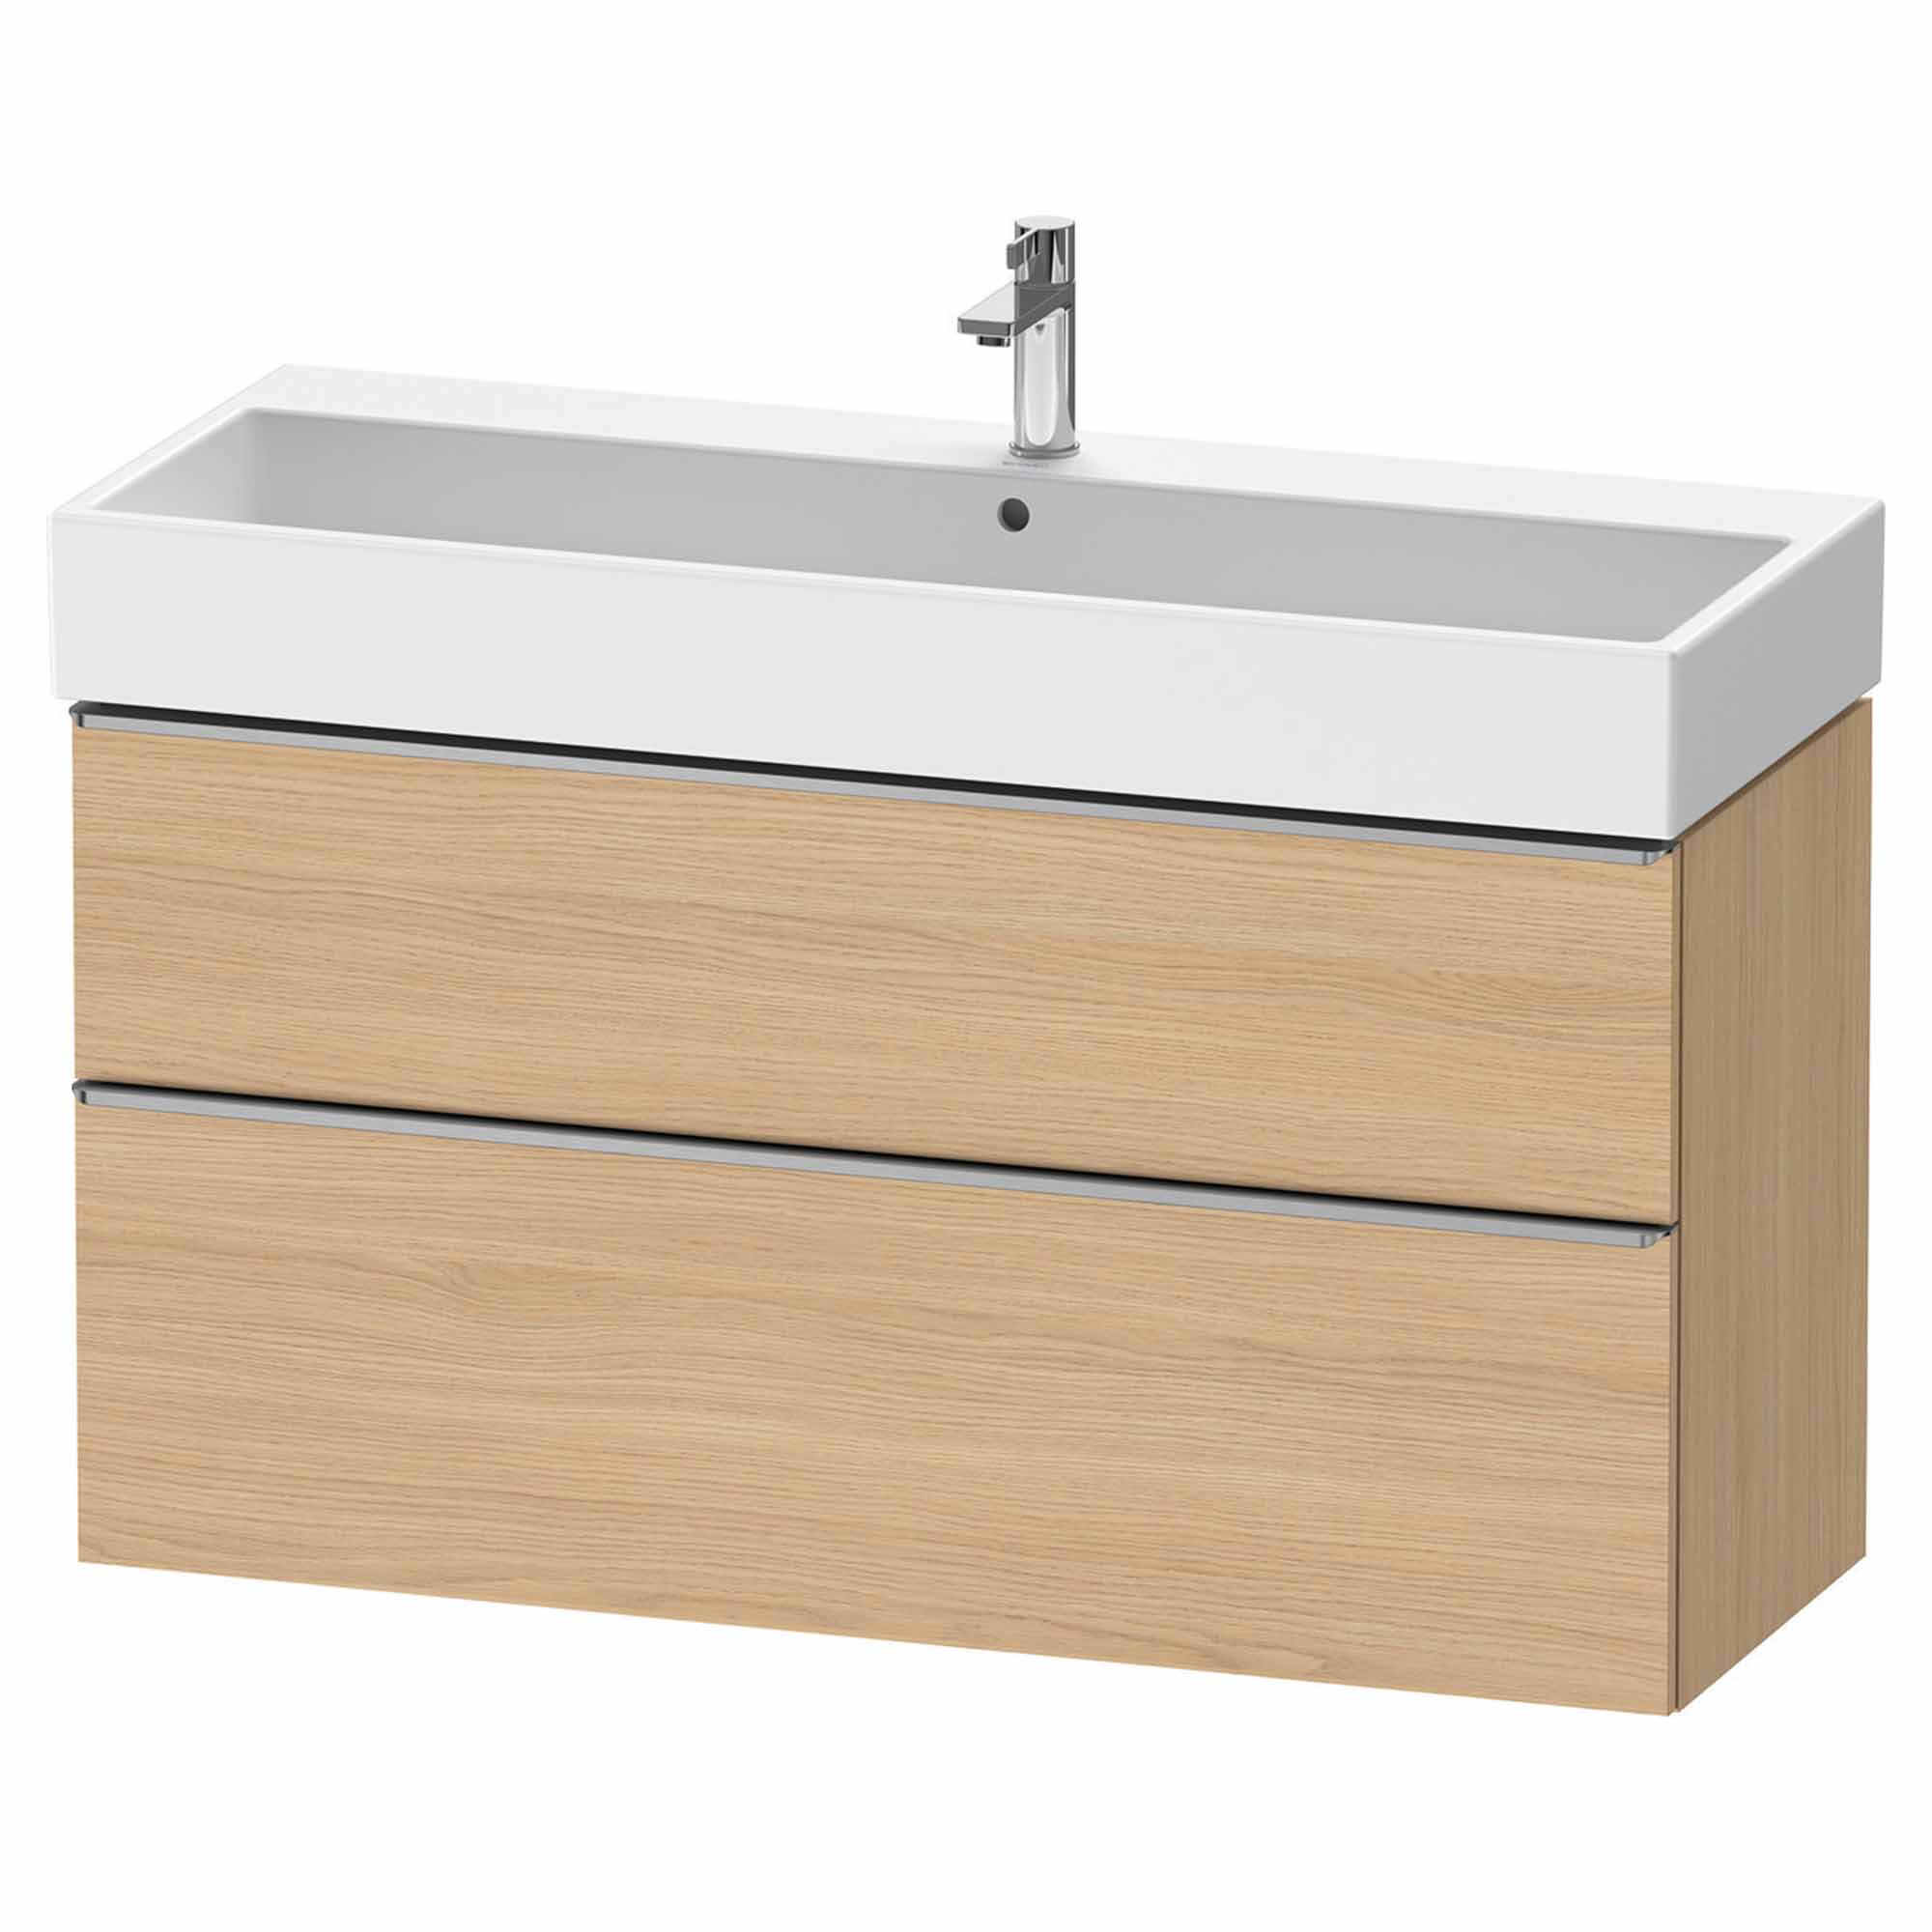 duravit d-neo 1200 wall mounted vanity unit with vero basin natural oak stainless steel handles